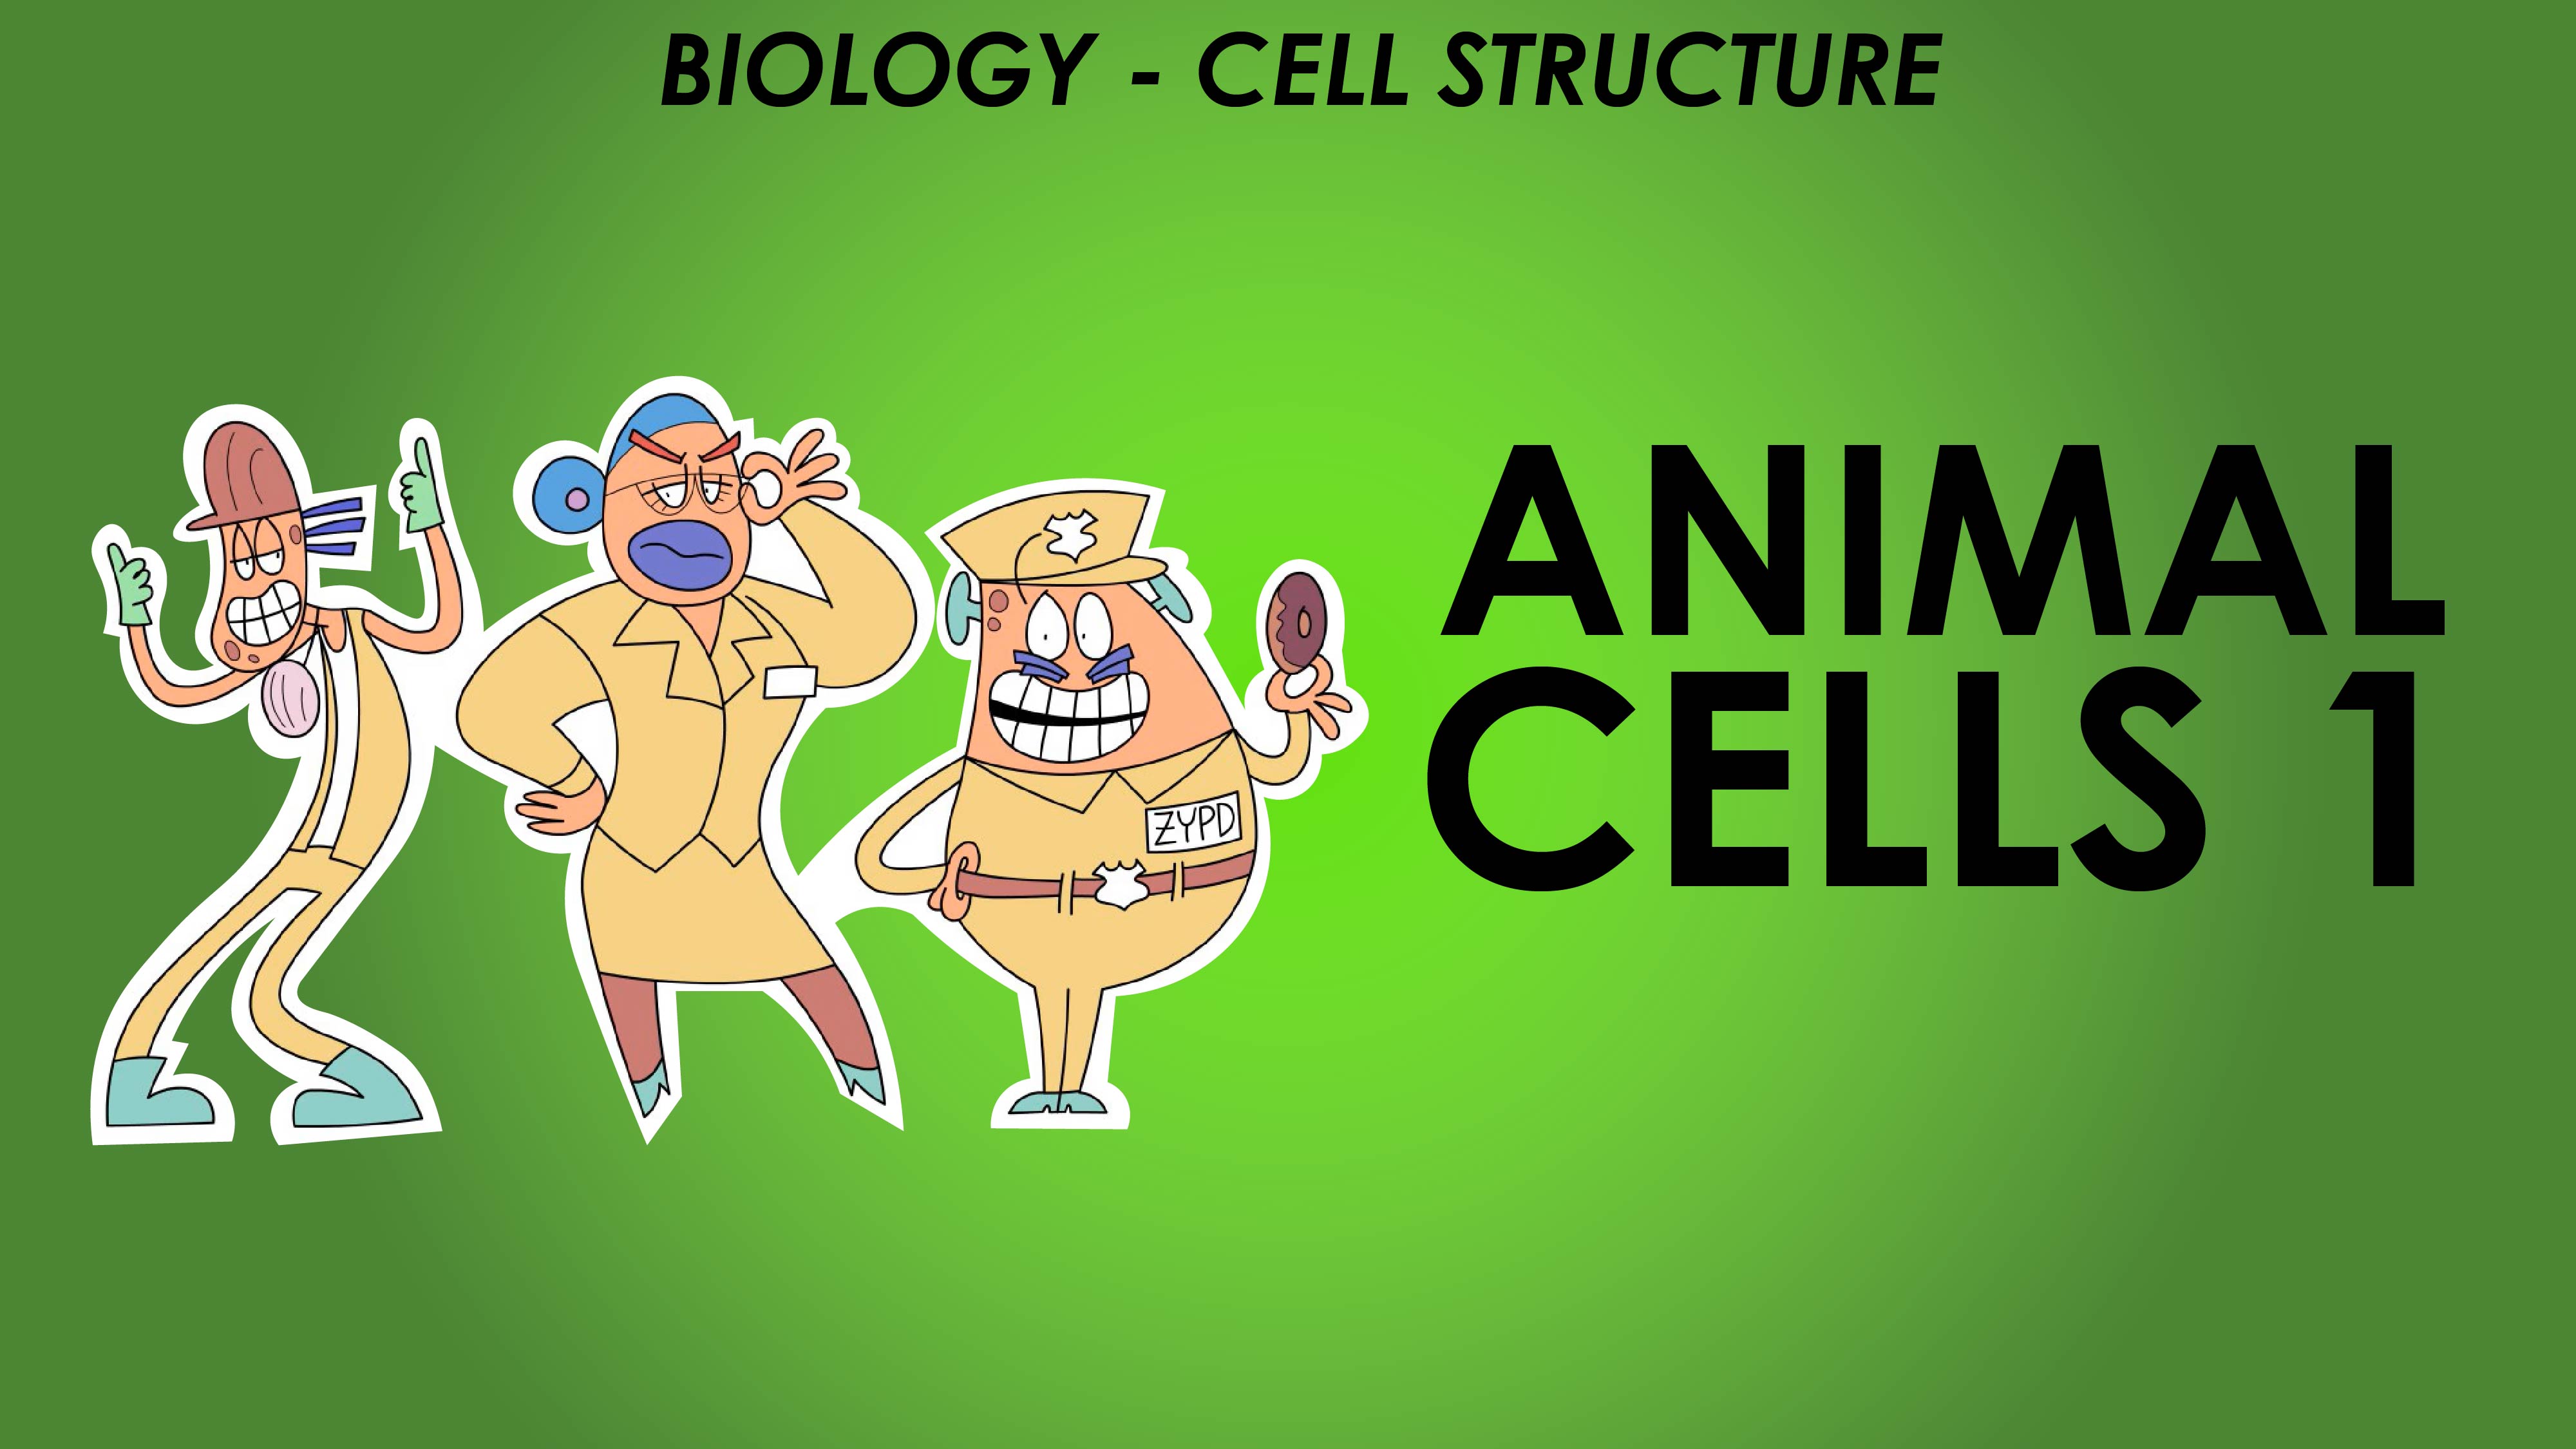 Animal Cells 1 - Cell Structure